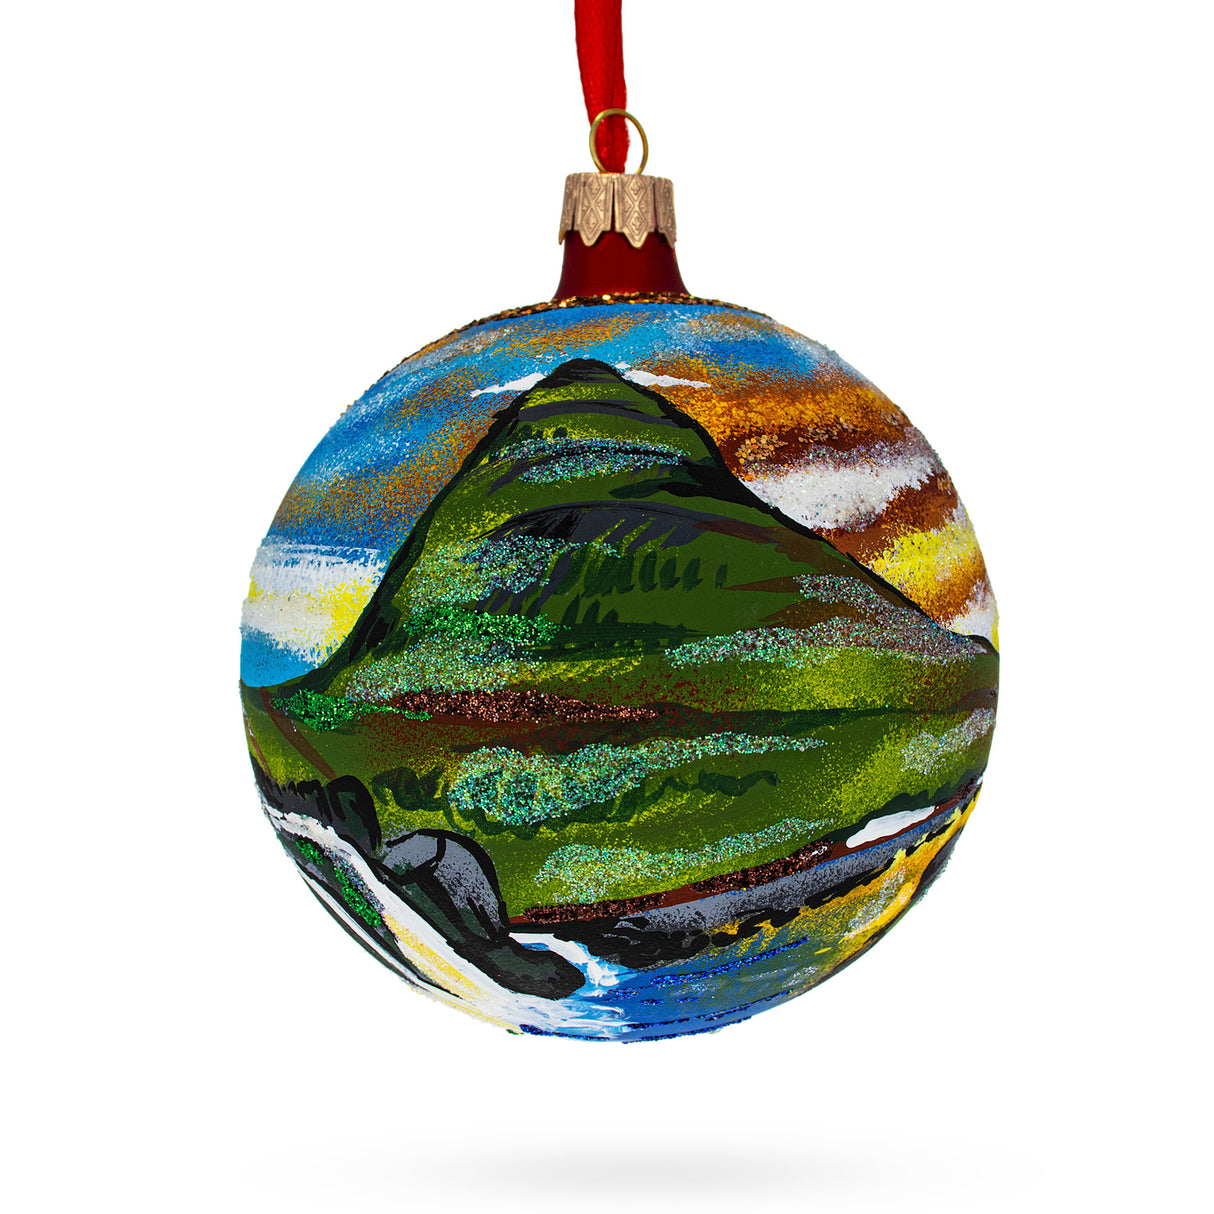 Glass Kirkjufell Mountain, Iceland Glass Ball Christmas Ornament 4 Inches in Multi color Round